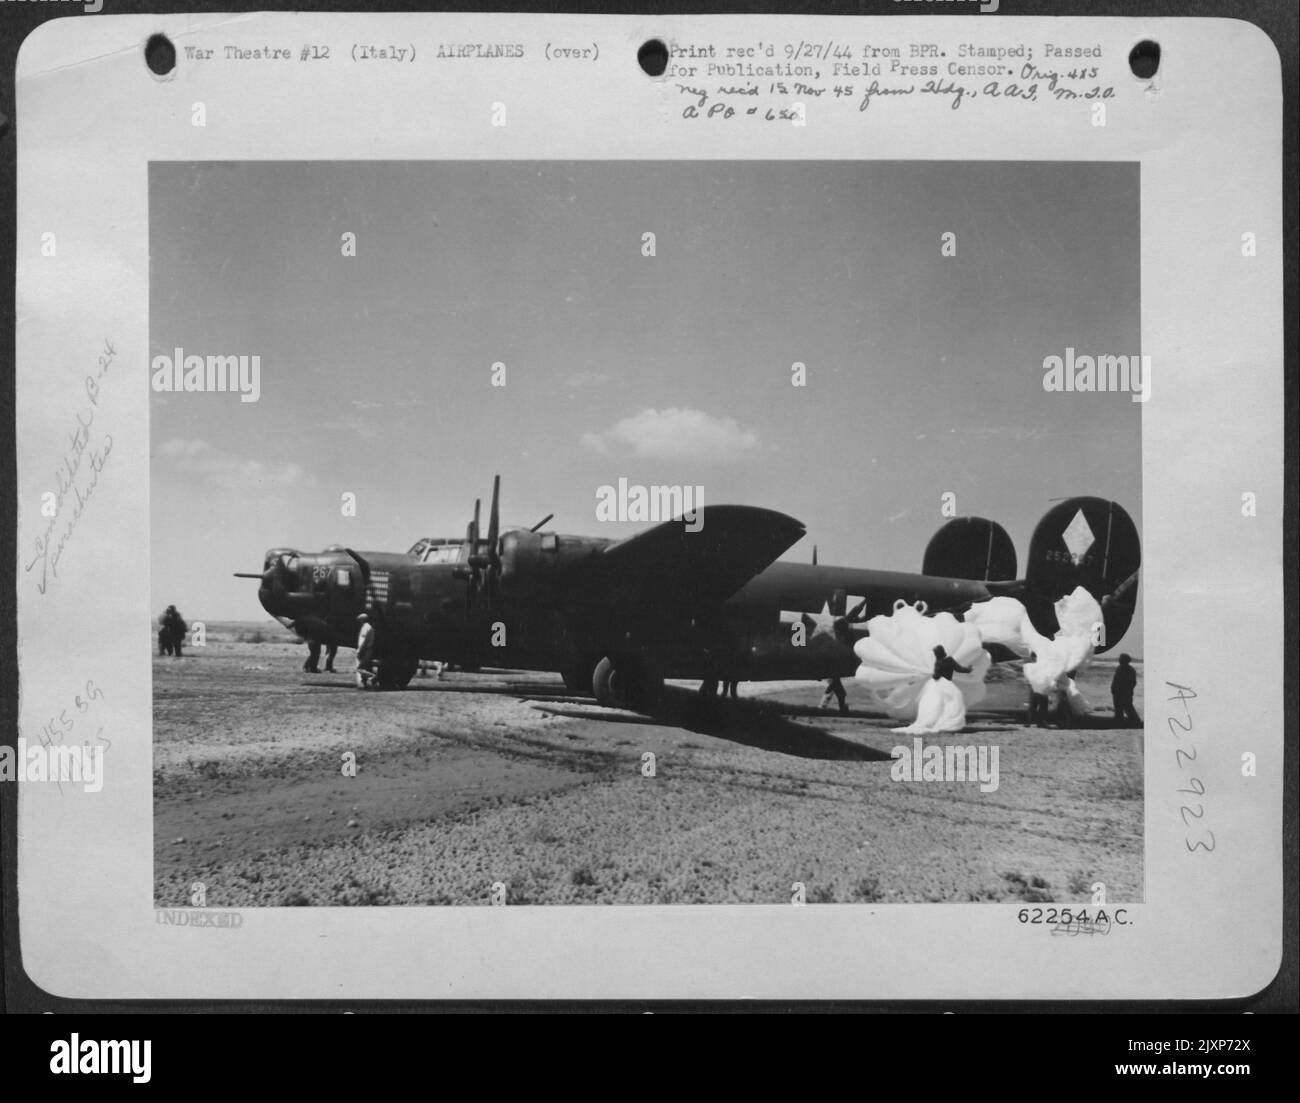 Its Hydraulic System Shot Out By Flak Over The Ferrara Railroad Bridge In Northern Italy, This Consolidated B-24 Liberator Bomber Of The 15Th Af Landed With The Aid Of Parachutes Preventing The Lib From Overshooting The Landing Strip. Stock Photo